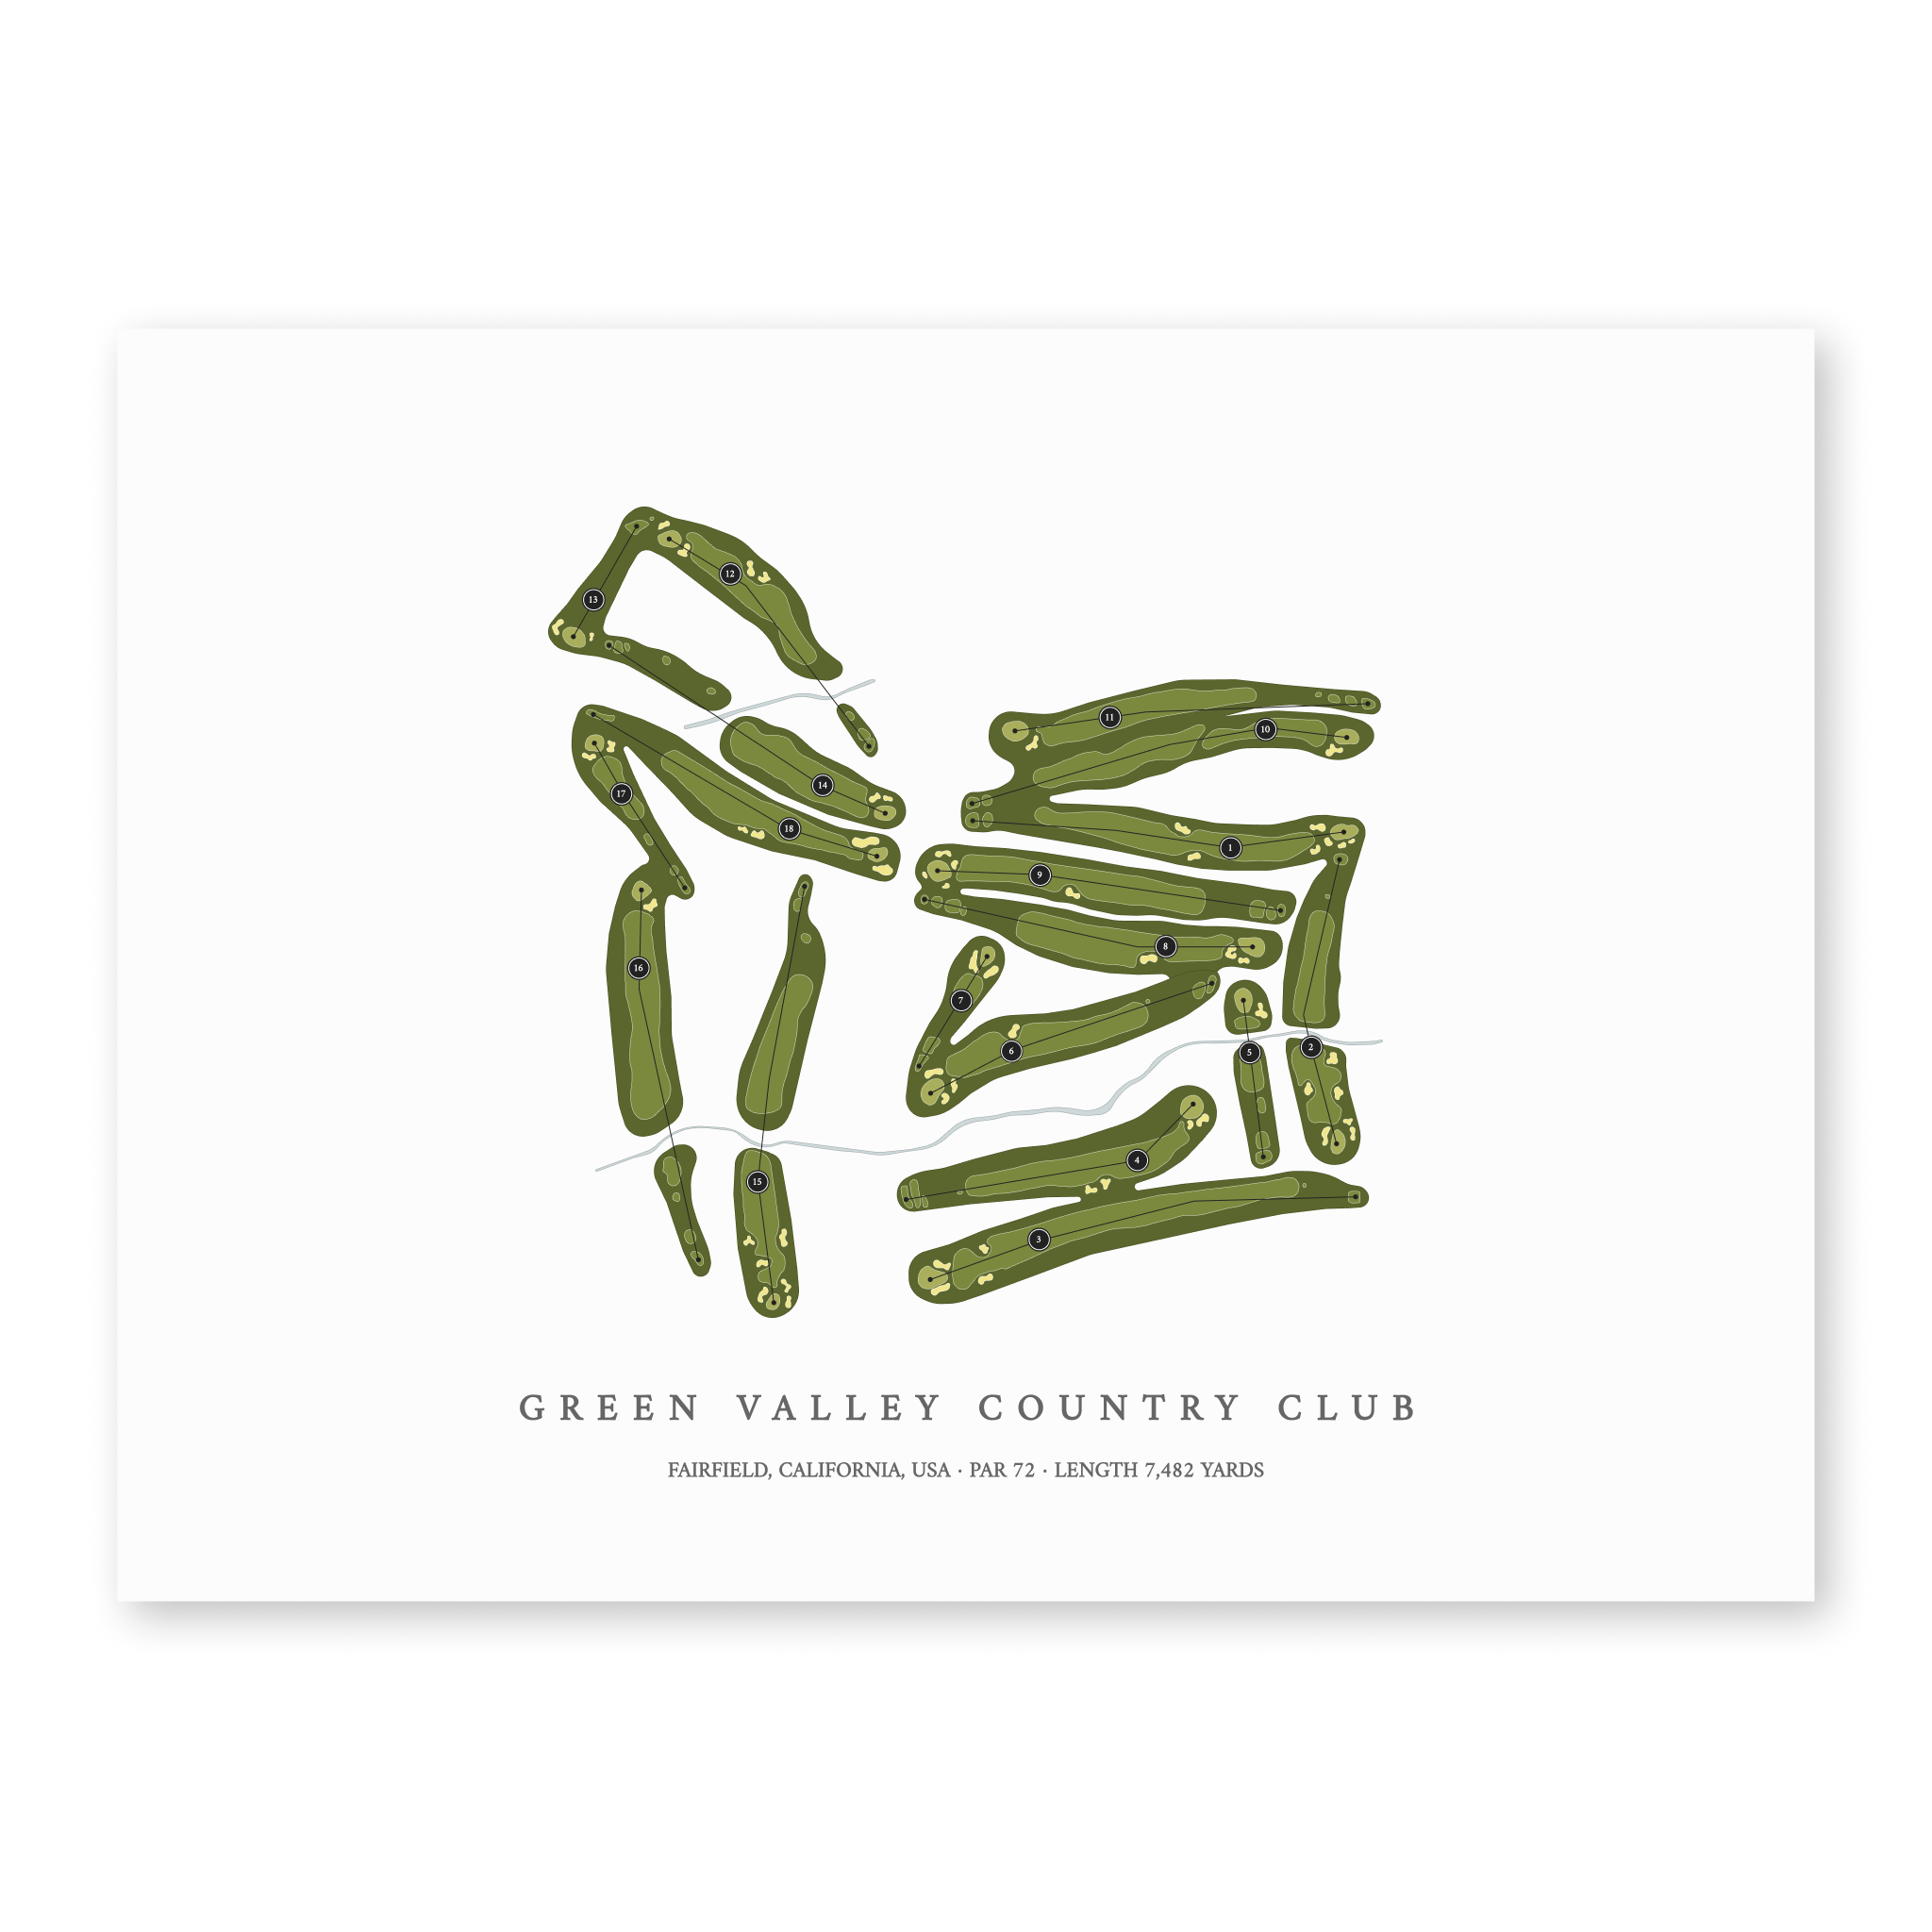 Green Valley Country Club | Golf Course Map | Unframed With Hole Numbers #hole numbers_yes